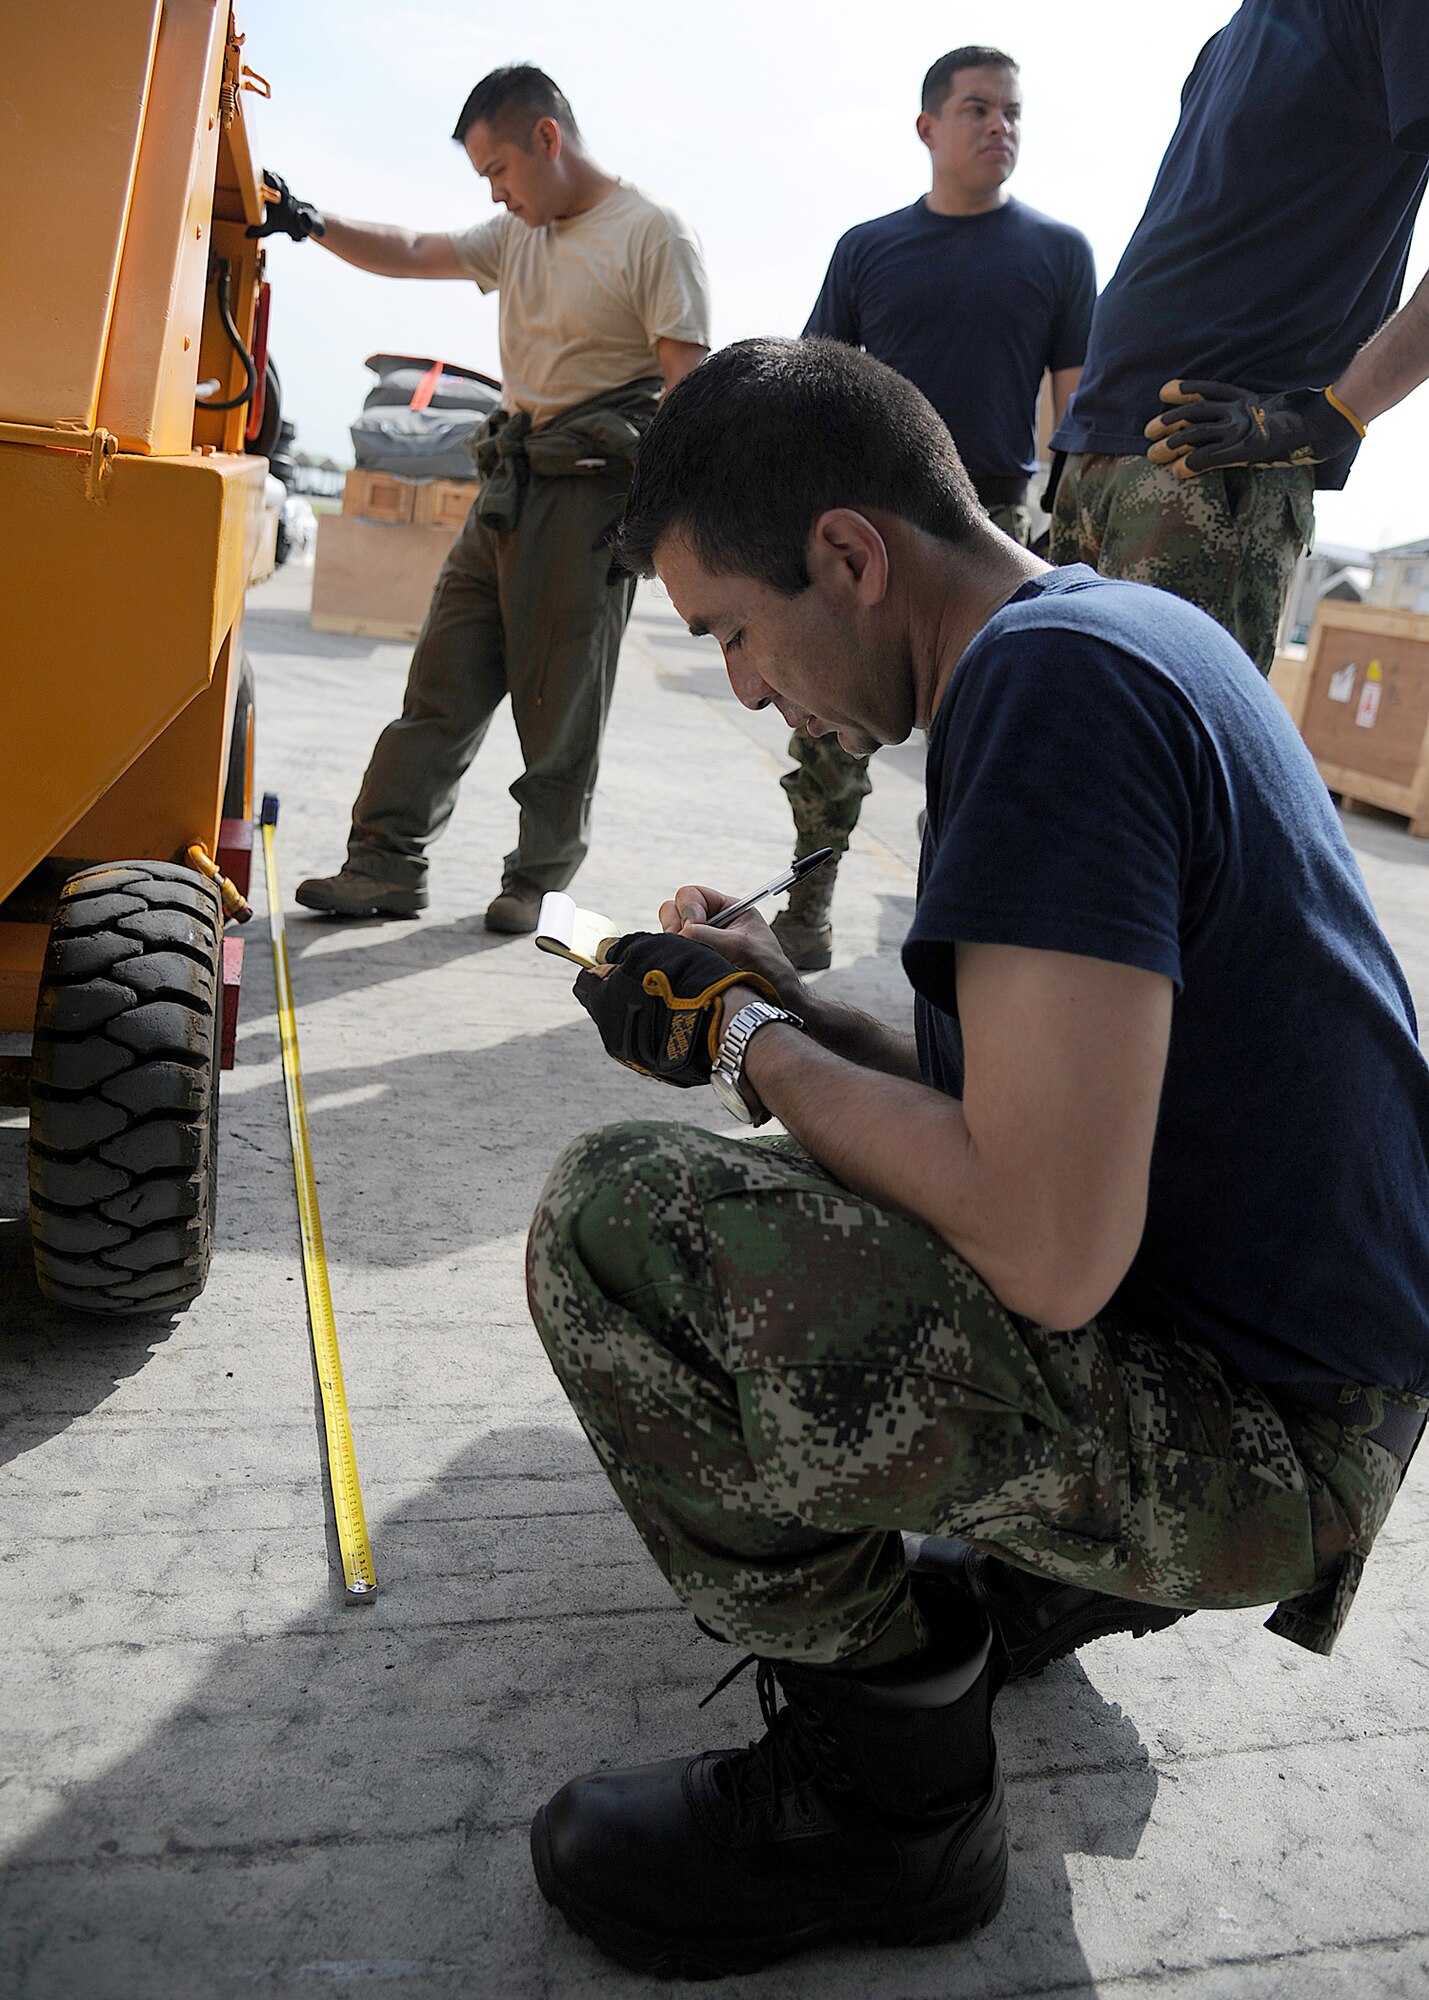 Members of the 571st Mobility Support Advisory Squadron and the Colombian air force, get dimensions for a generator for loading onto aircraft during an Air Mobility Command Building Partner Capacity mission at General Alberto Pauwels Rodriguez Air Base in Barranquilla, Colombia, June 27.  (U.S. Air Force photo by Tech. Sgt. Lesley Waters)